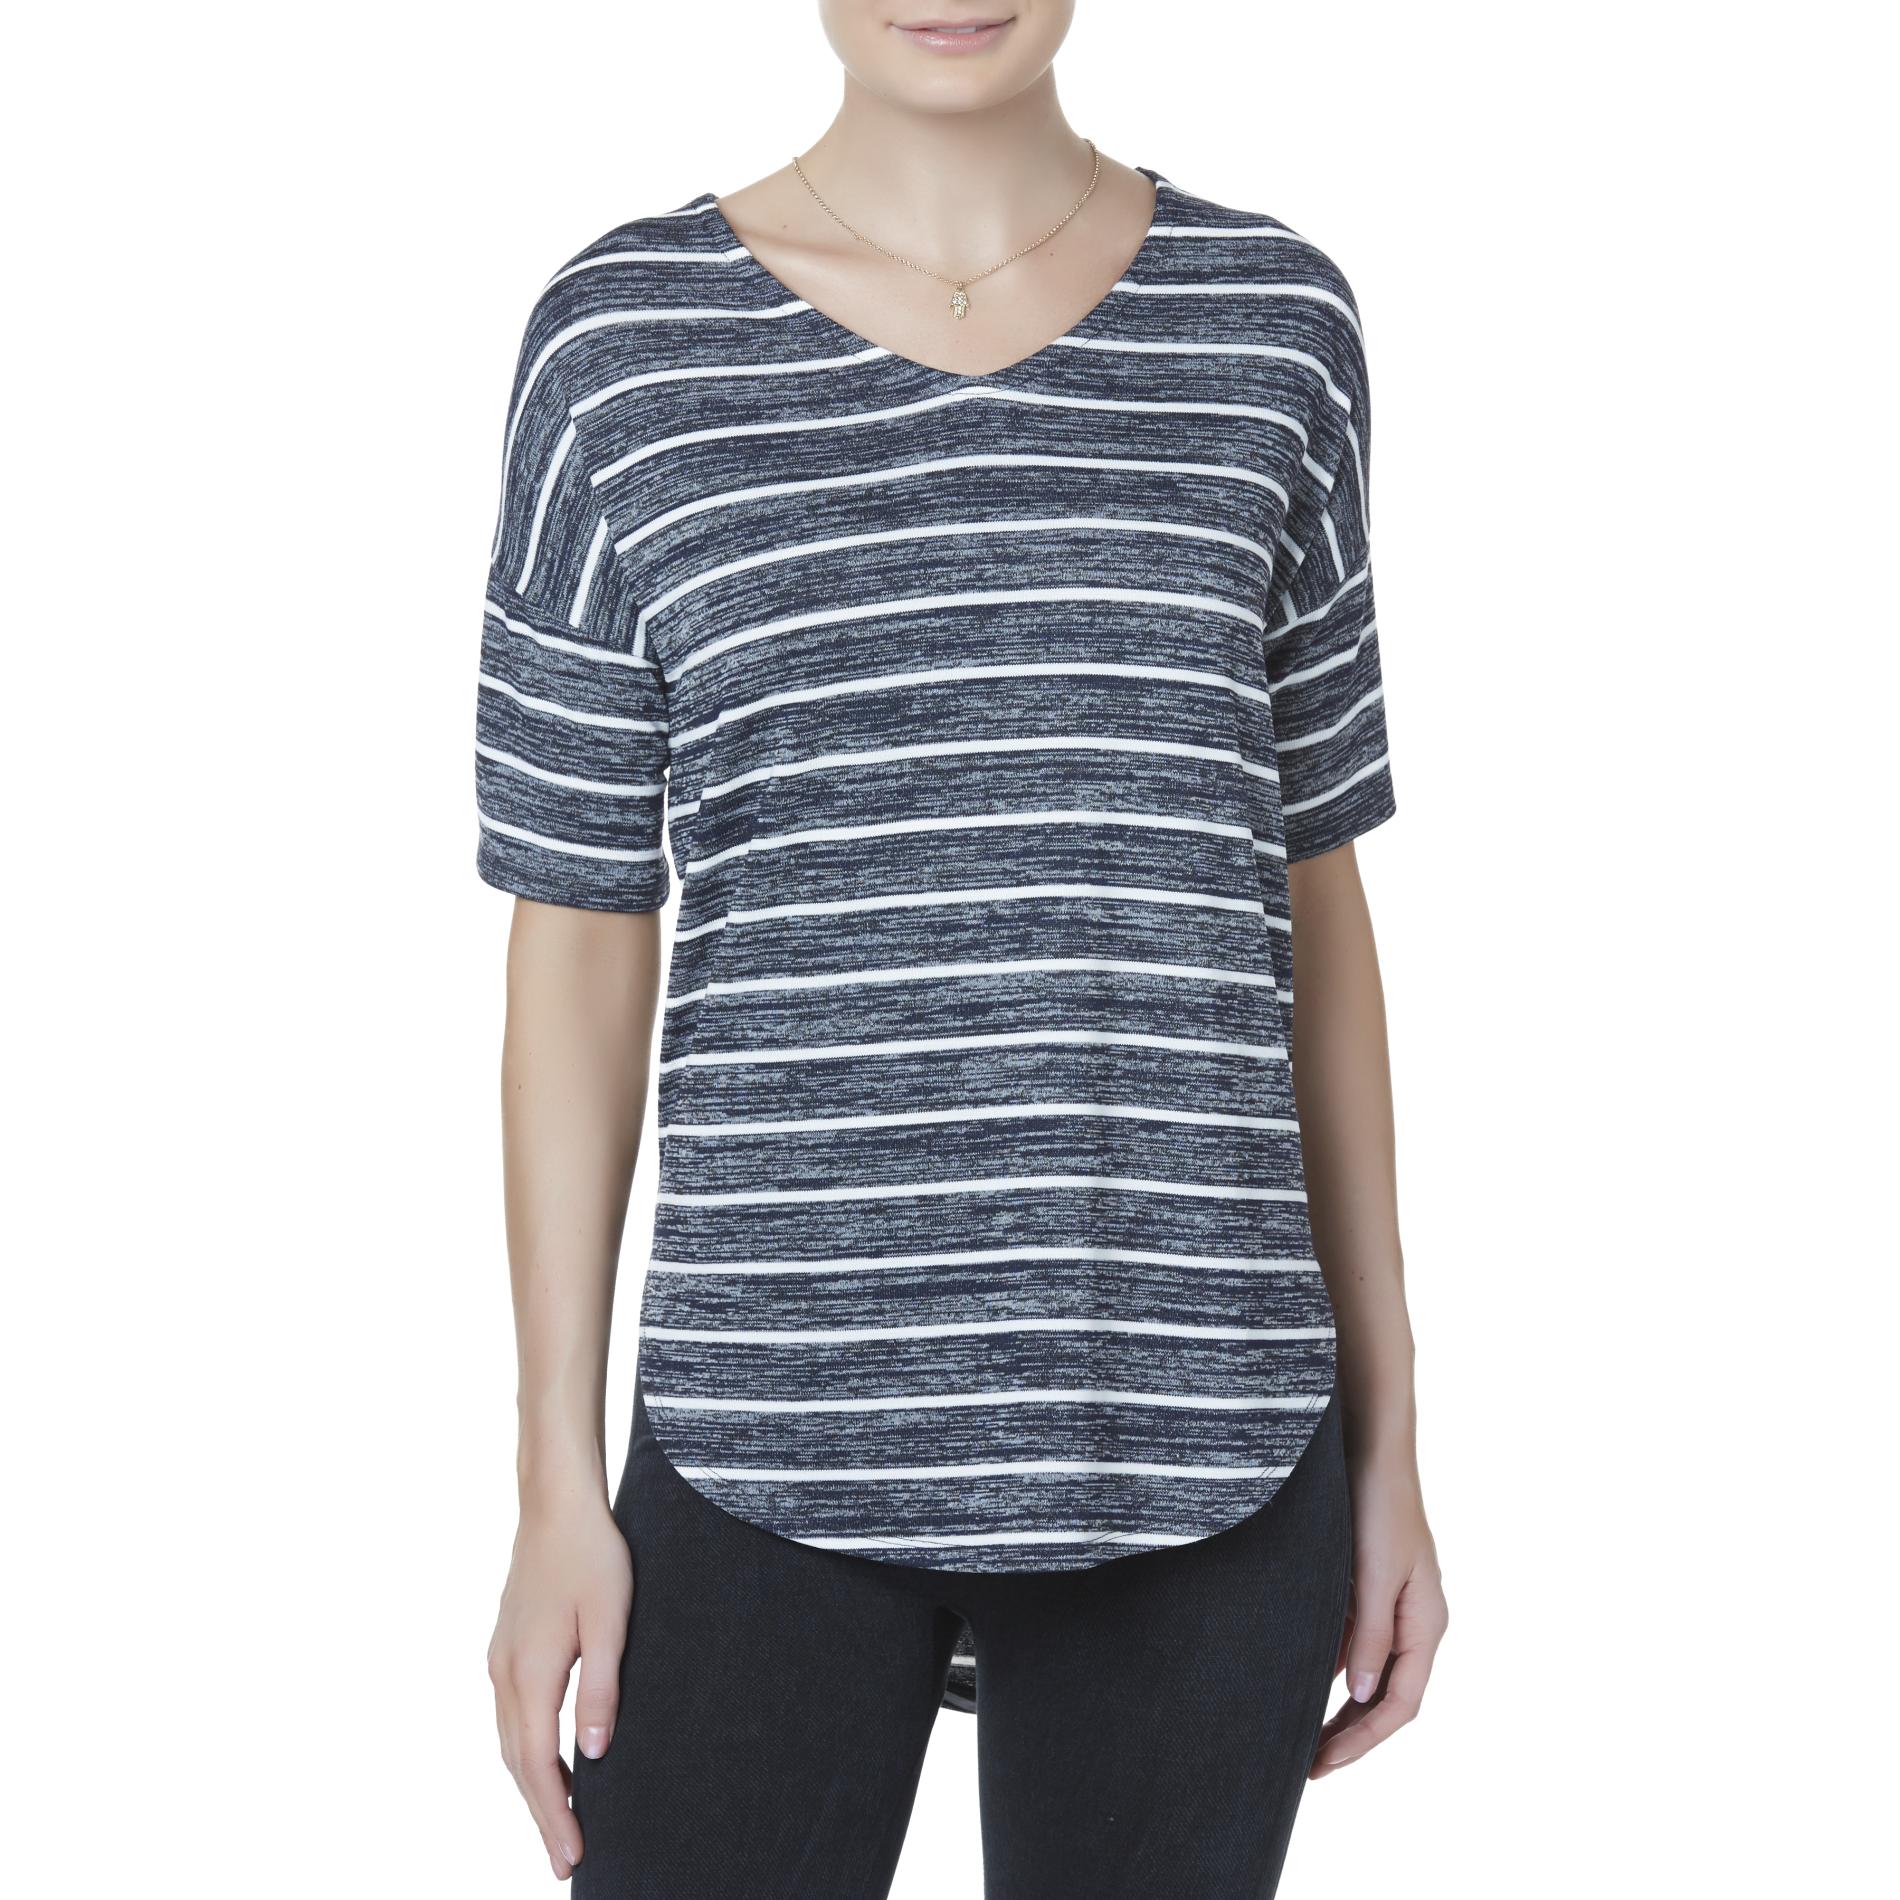 Simply Styled Women's V-Neck Top - Striped